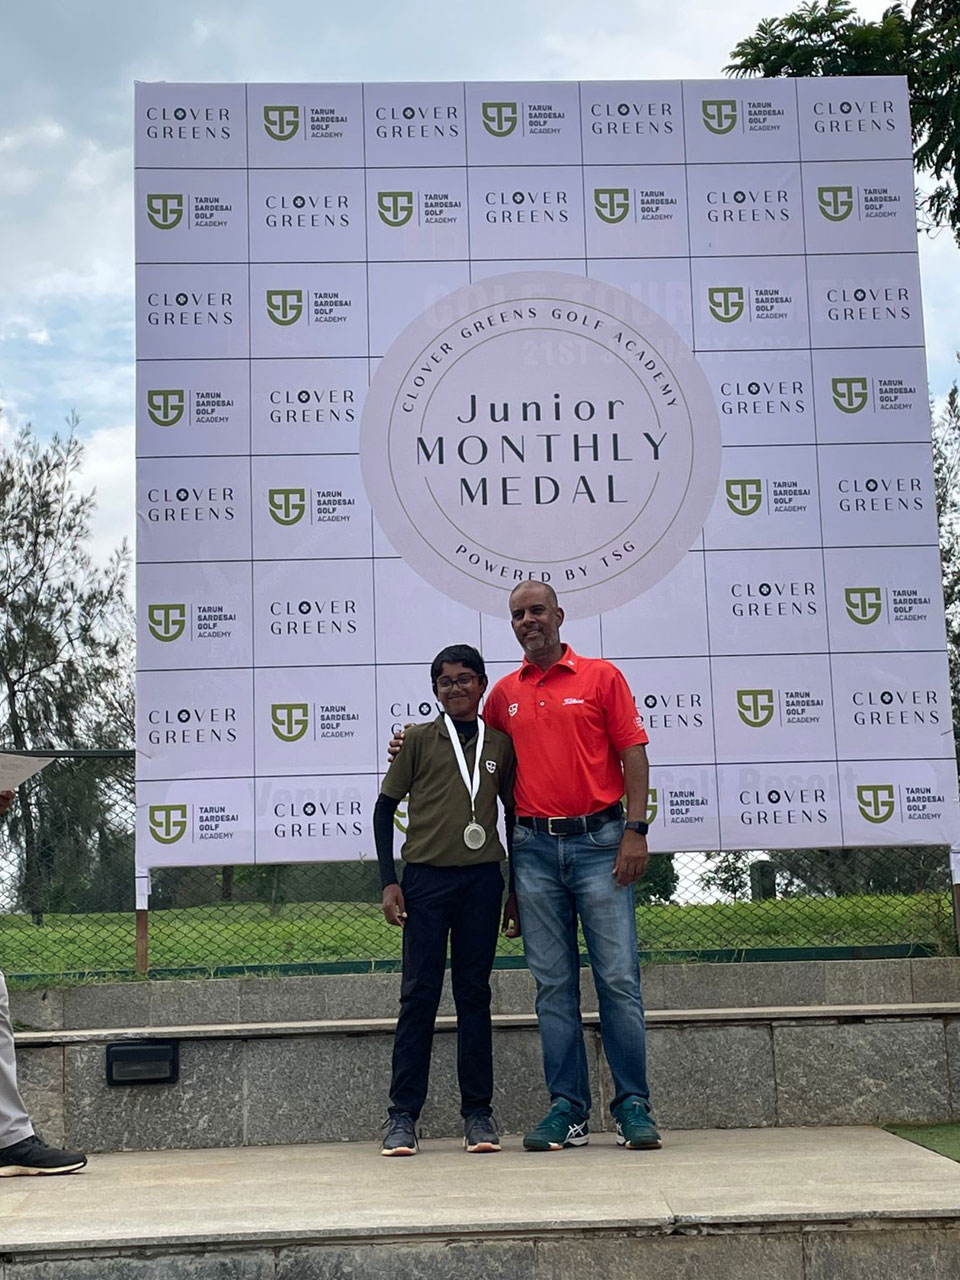 Nilofer Sivamoorthy finished as runner up in the 'B' Boys and the overall Category at the Clover Greens Junior Monthly Medal powered by TSG, held at Clover Greens Golf Course in Bangalore.